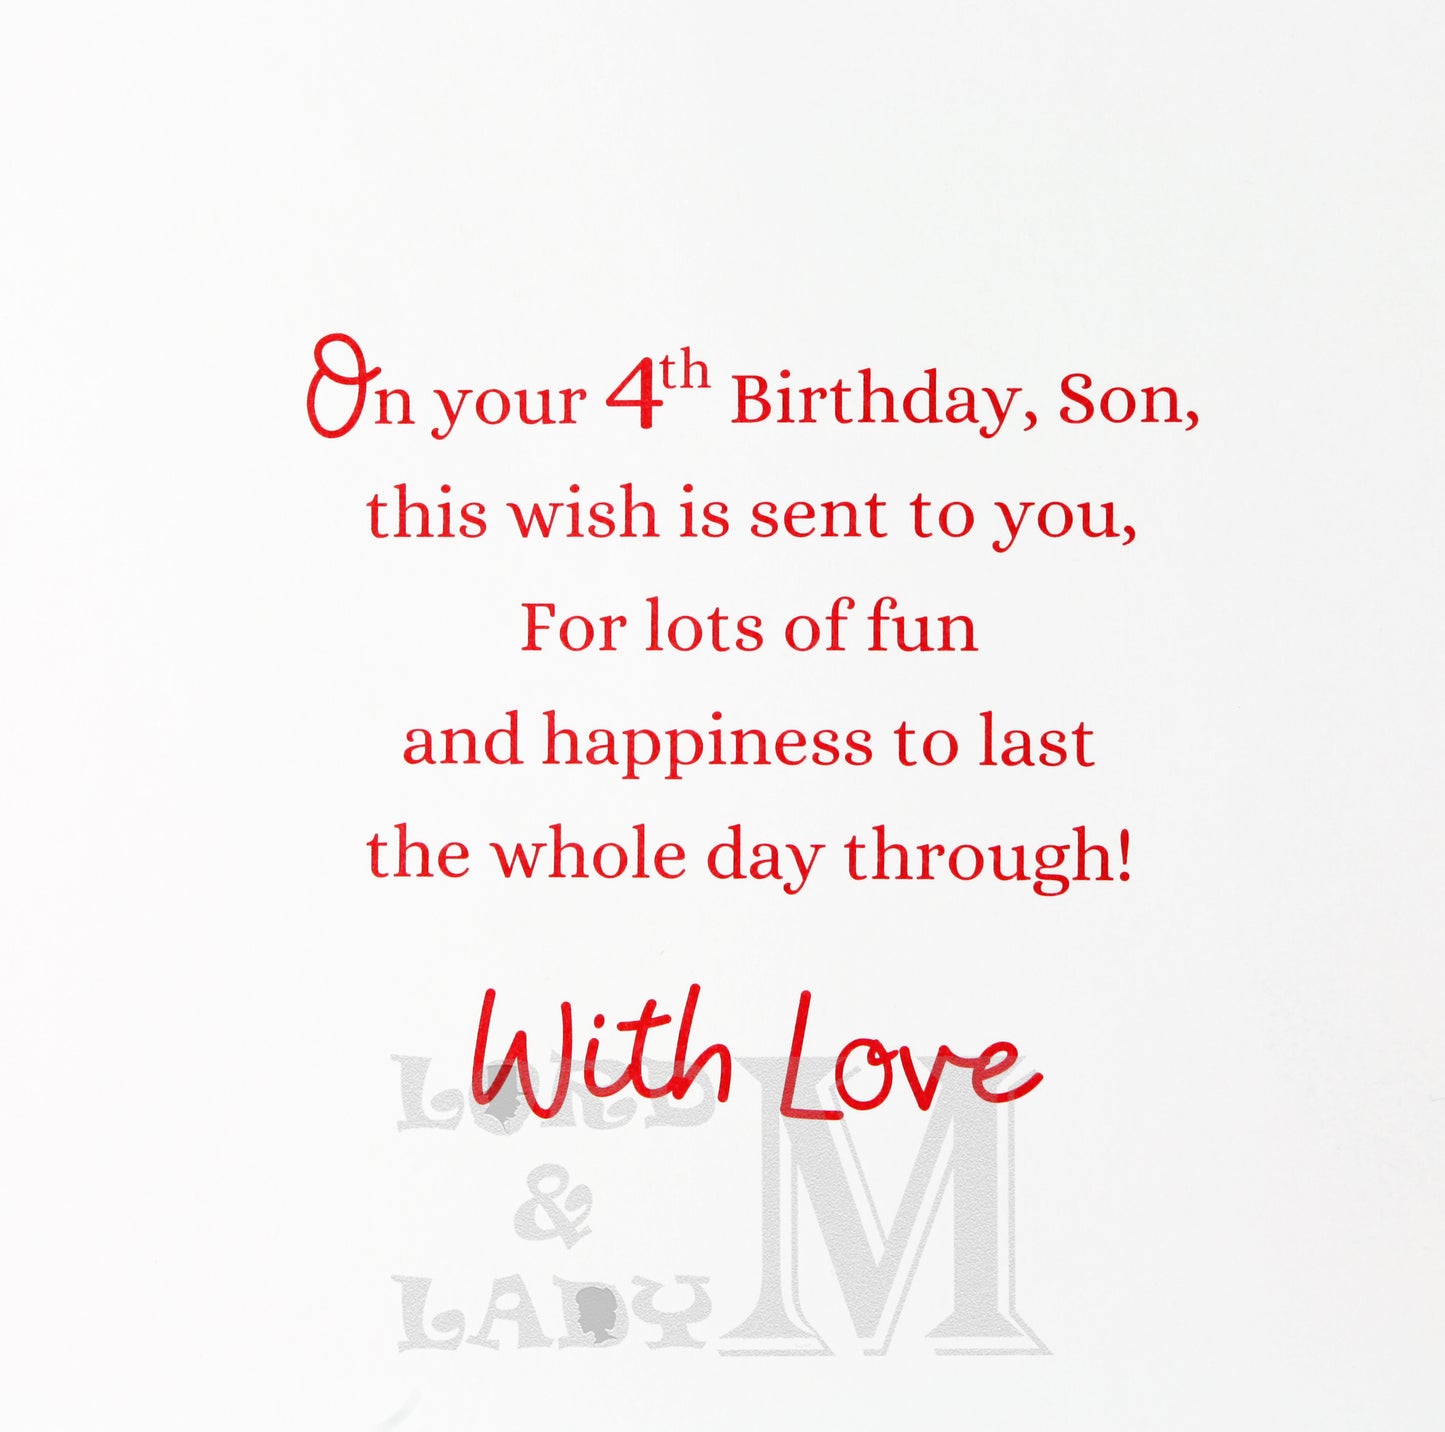 23cm - For A Very Special Son 4 Today! - BGC